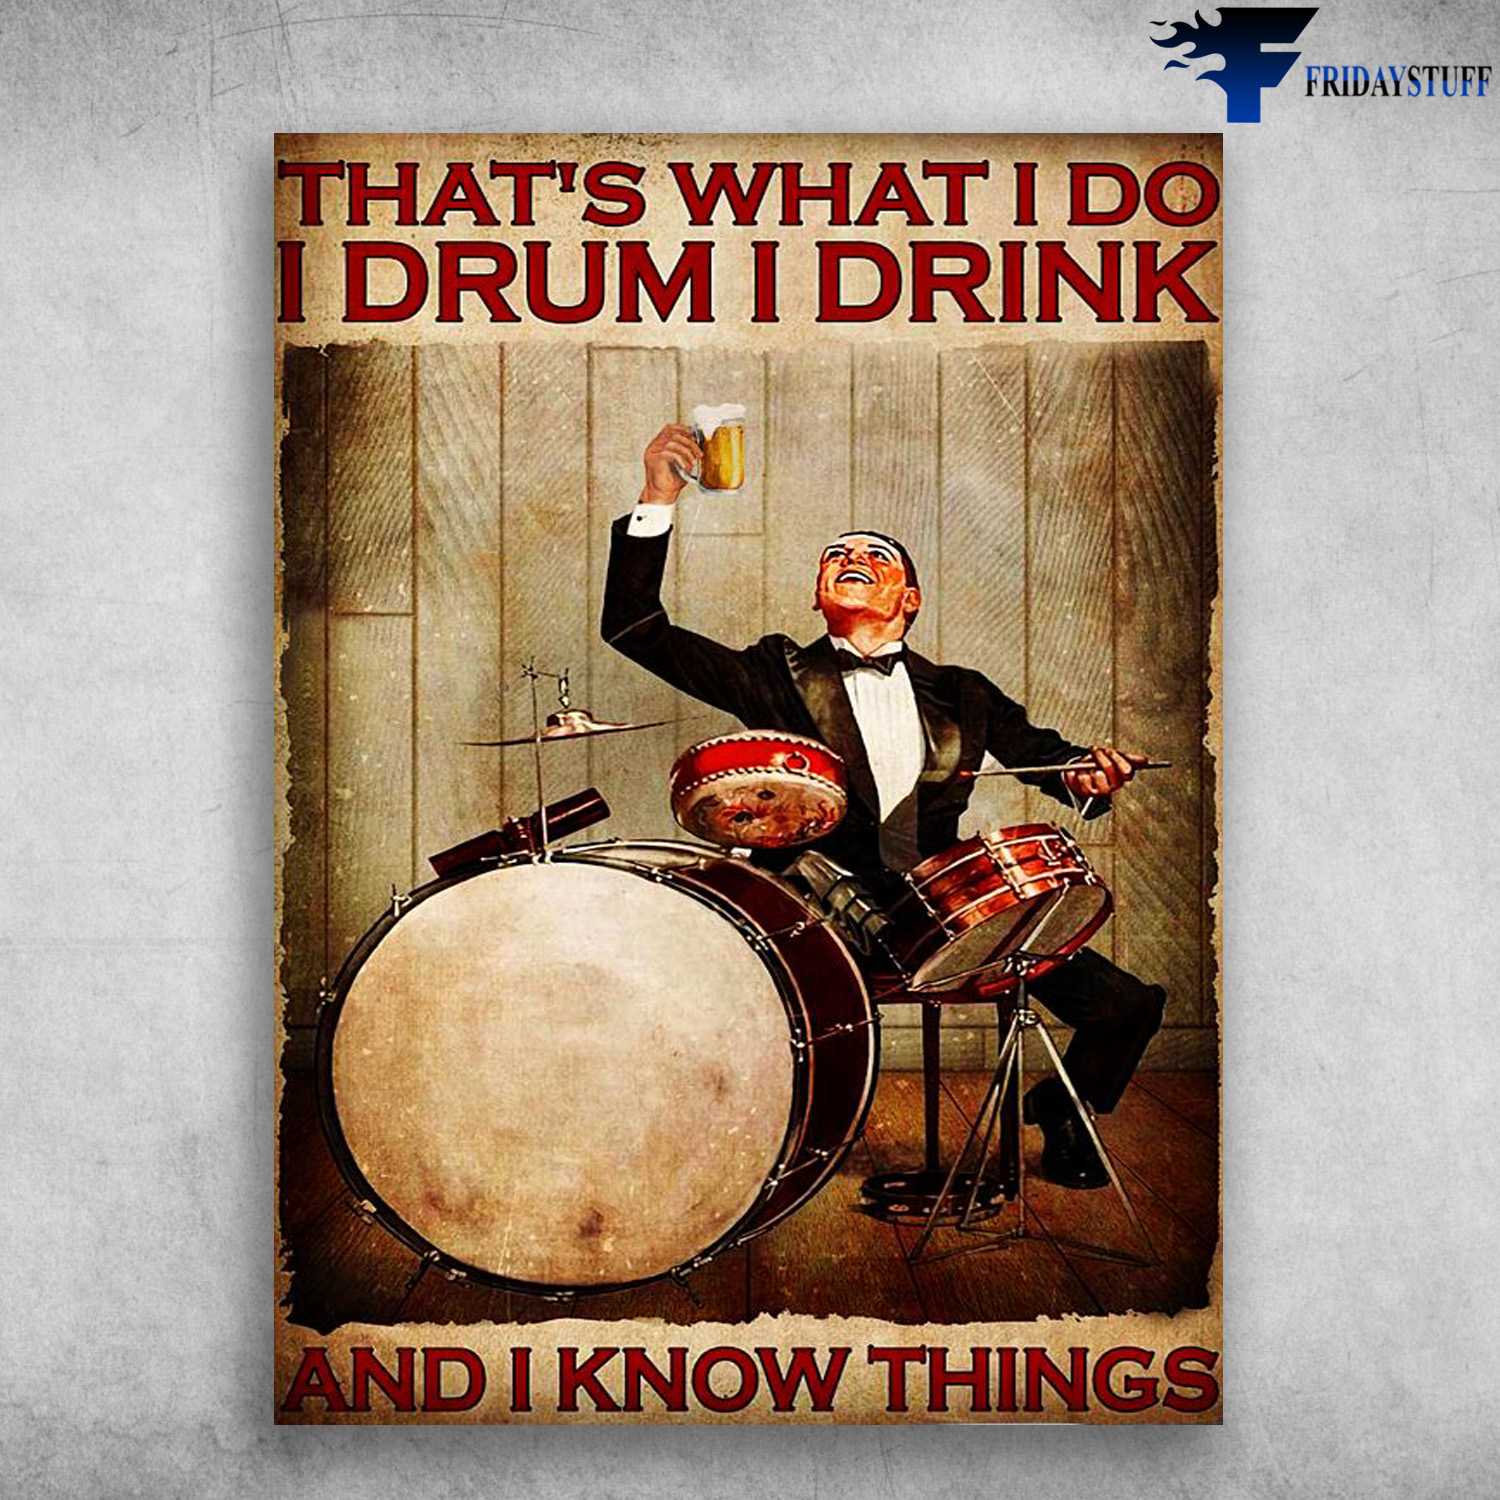 Drummer Drink Beer, Drumming Lover, That What I Do, I Drum, I Drink, And I Know Things